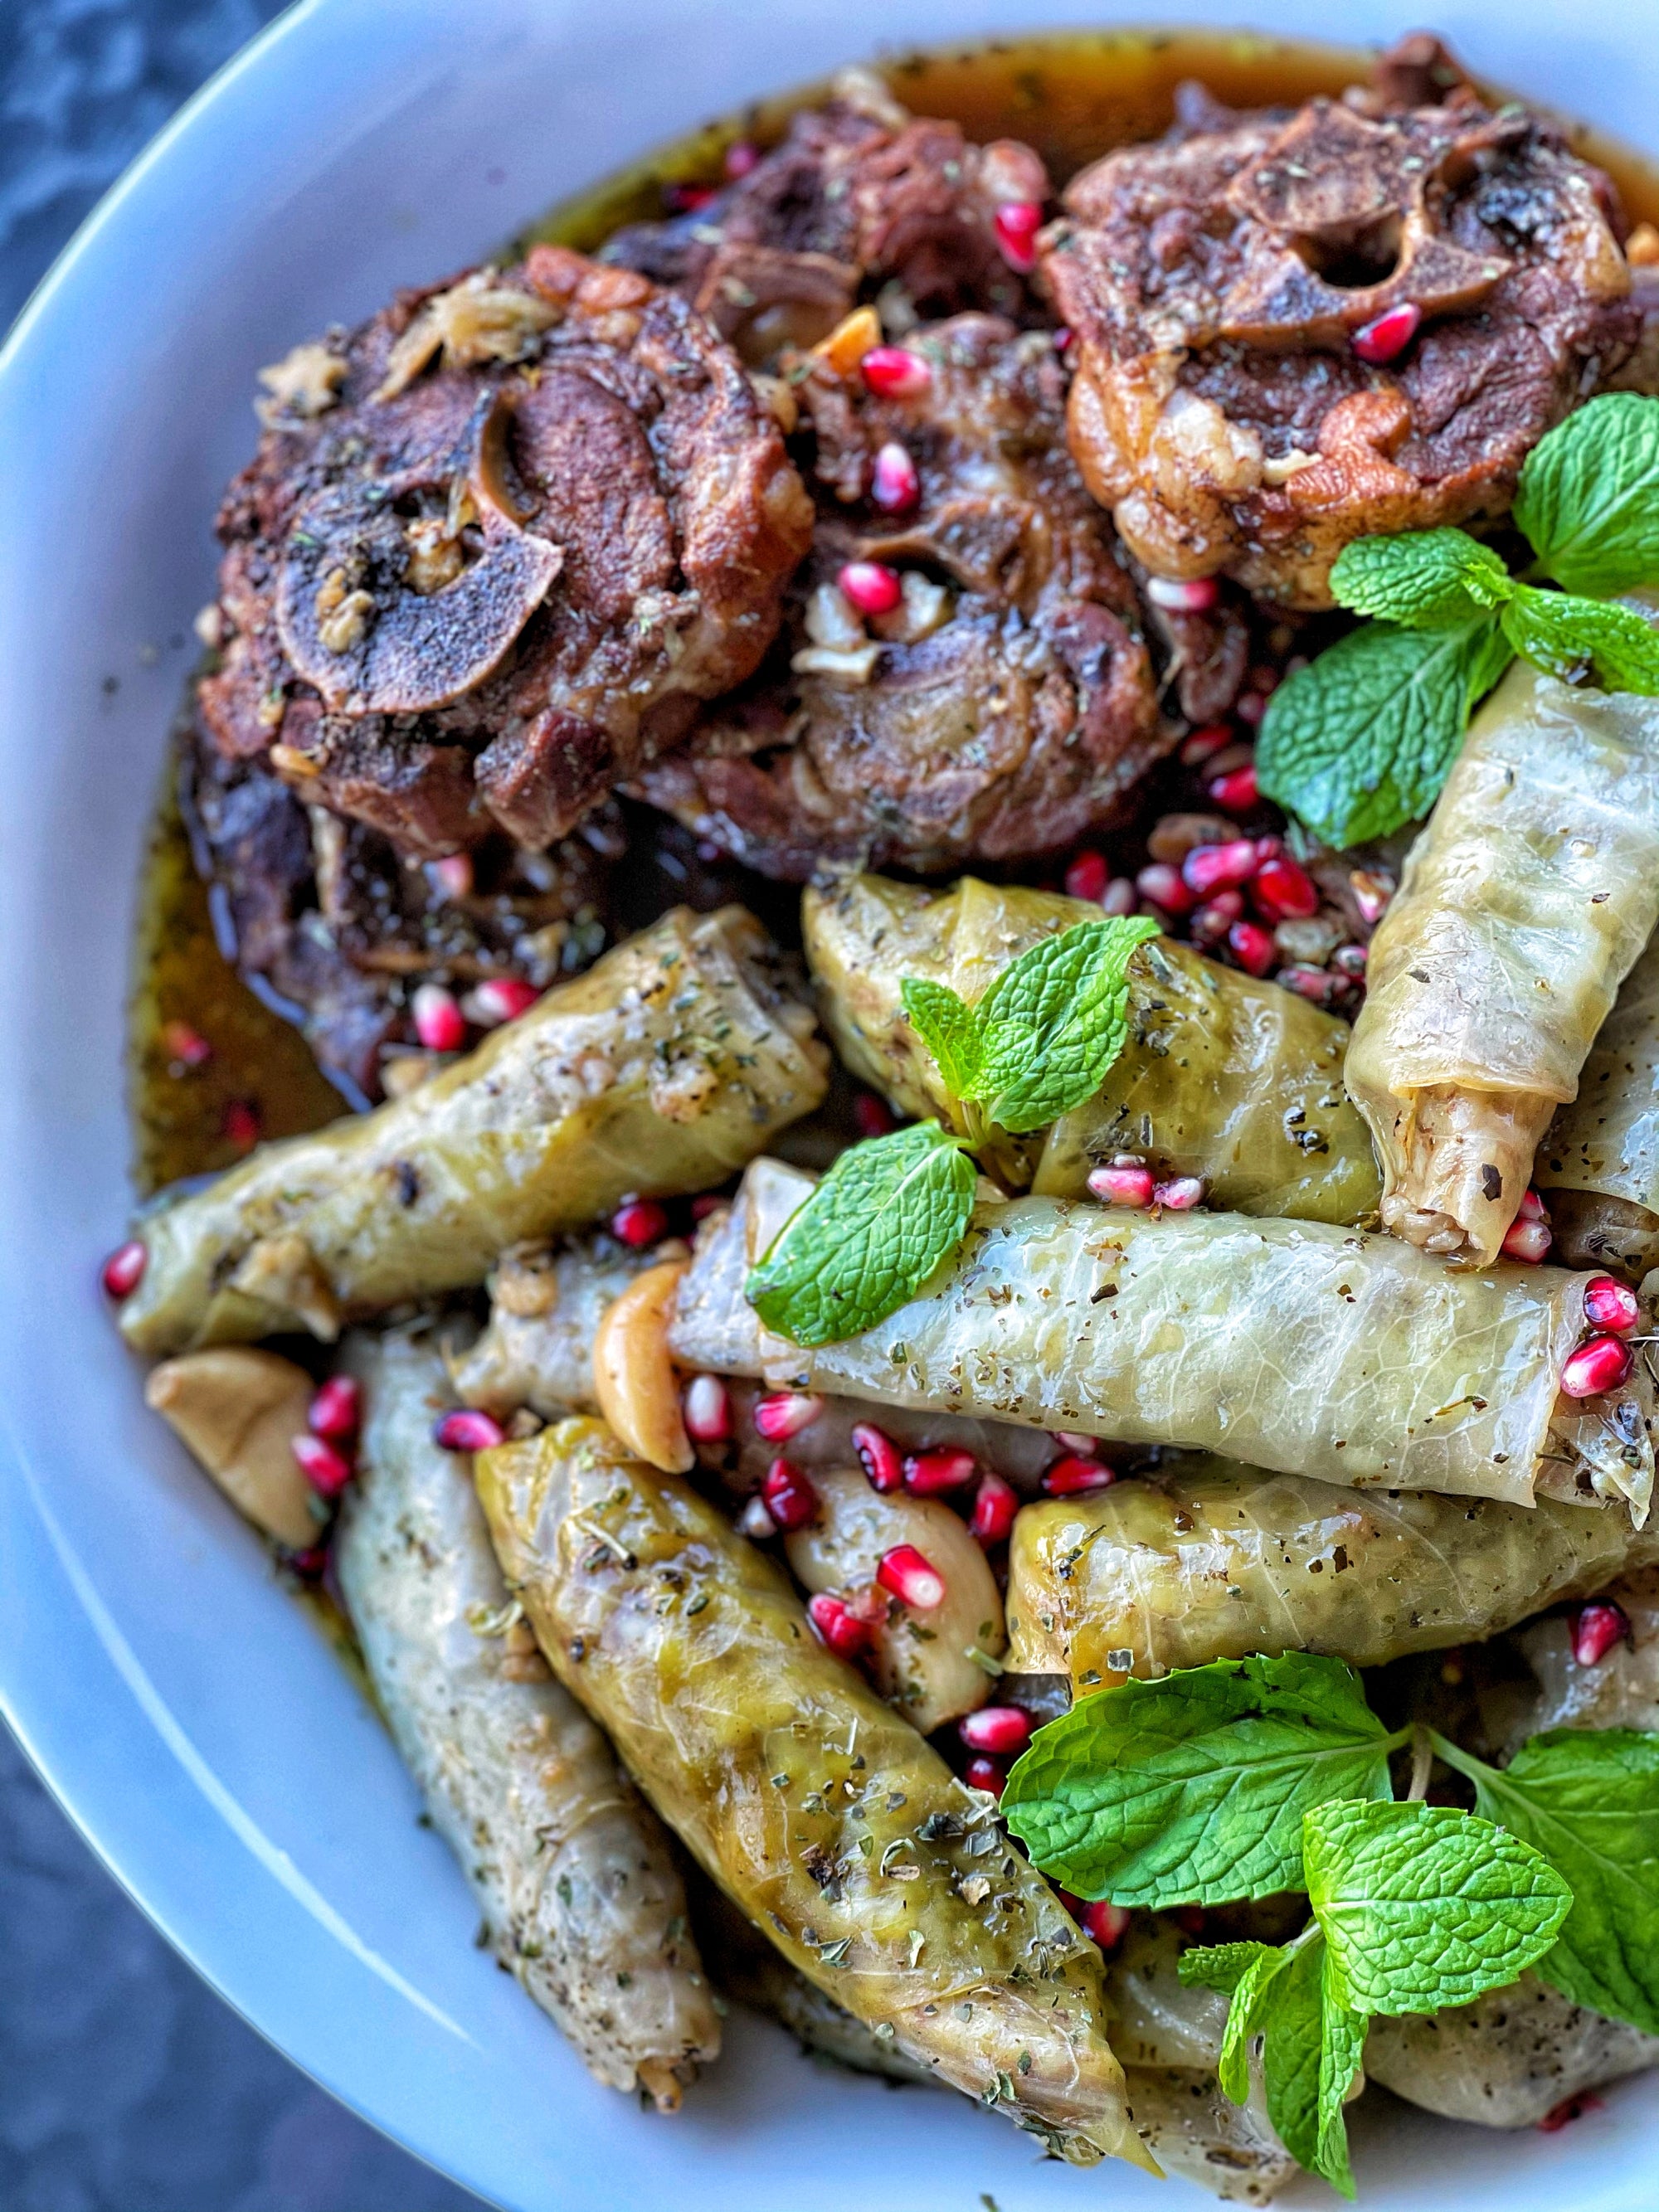 Cabbage Rolls 'Malfouf" with Pomegranate Molasses